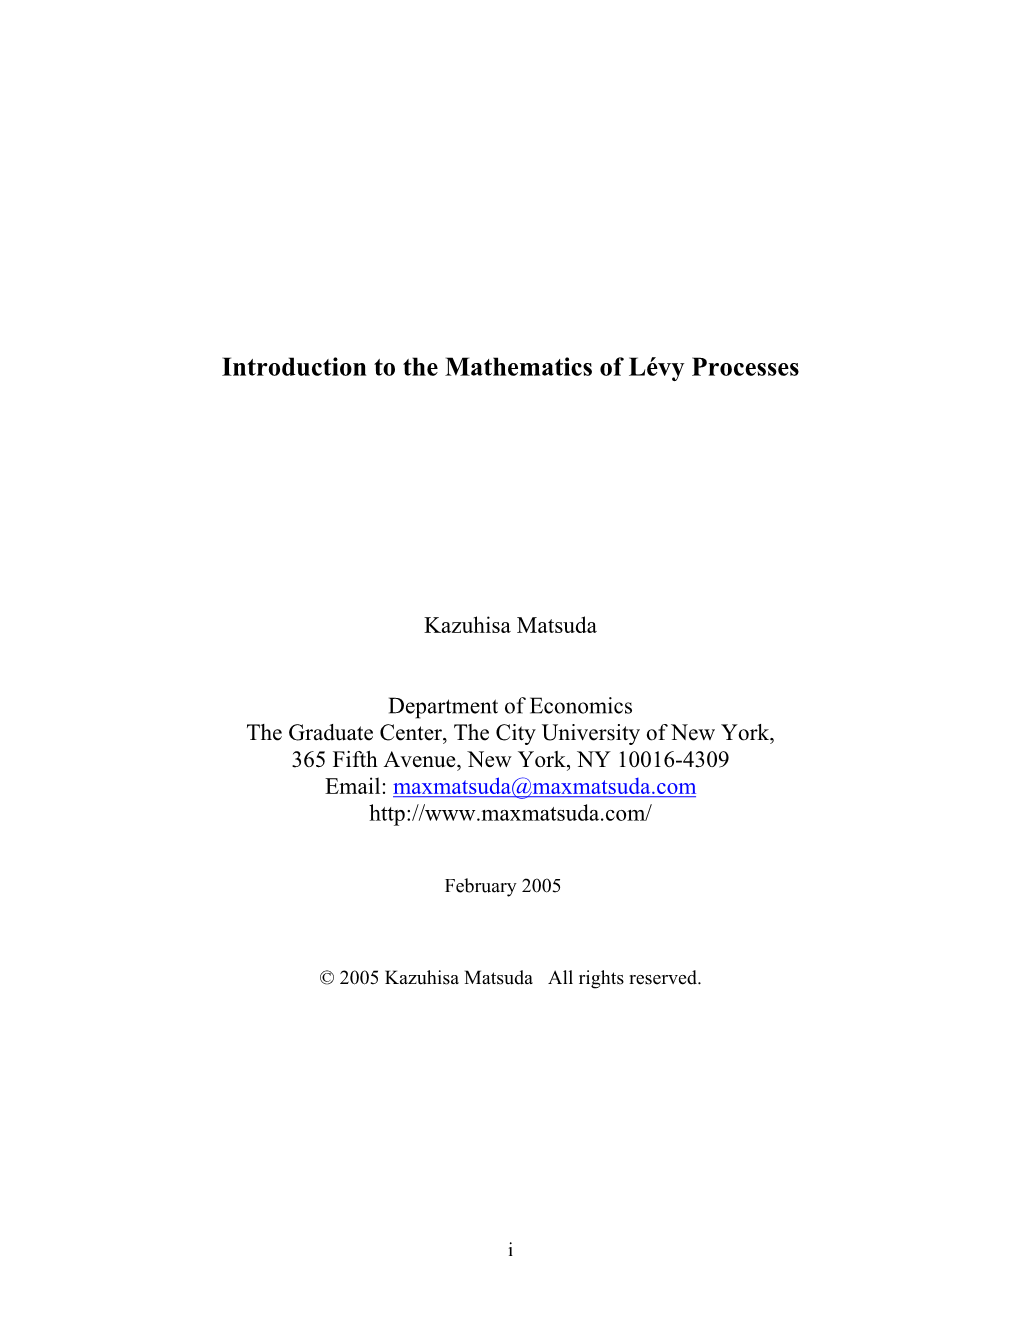 Introduction to the Mathematics of Lévy Processes